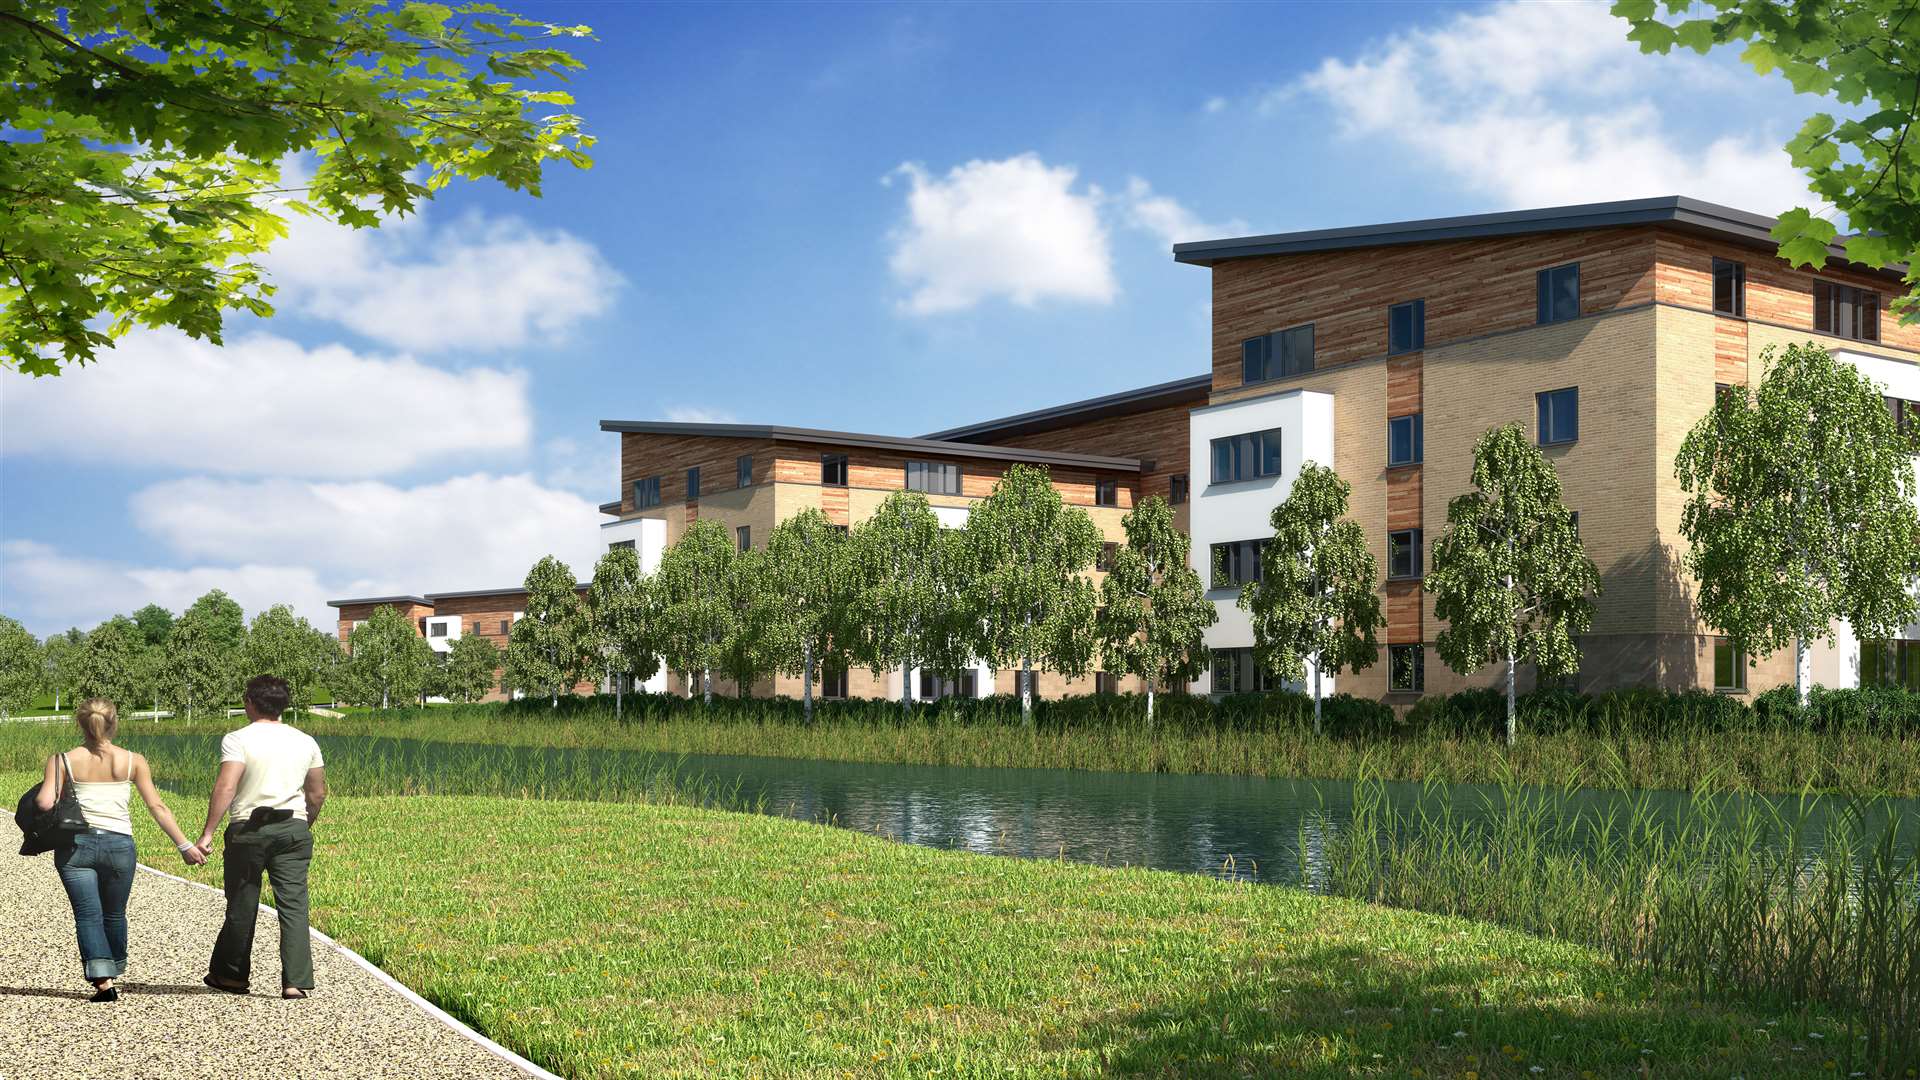 Maidstone council set to reapprove Kent Medical Campus plans